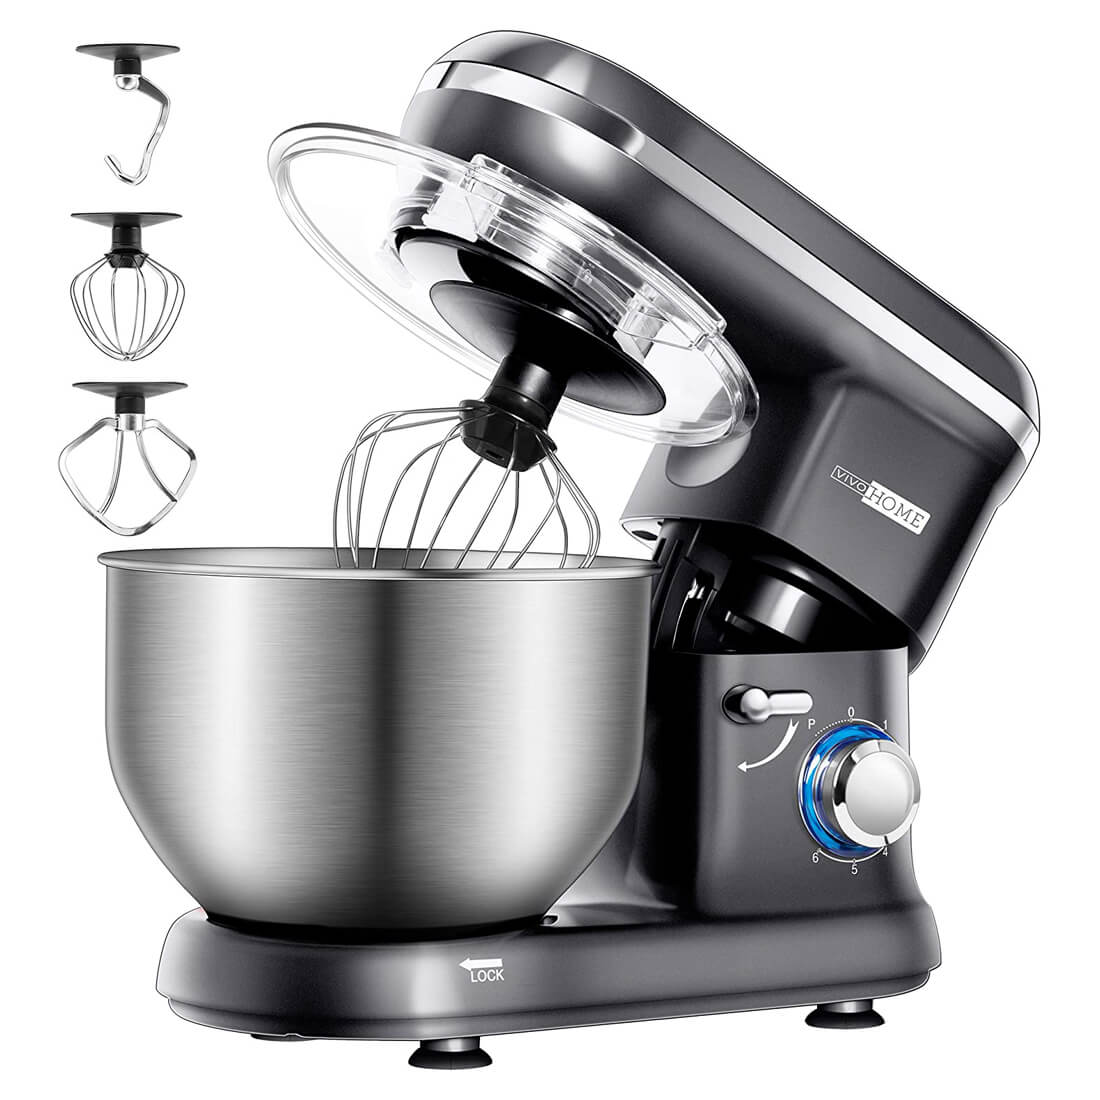 Stand mixer dough hook attachment, stainless steel, KitchenAid 